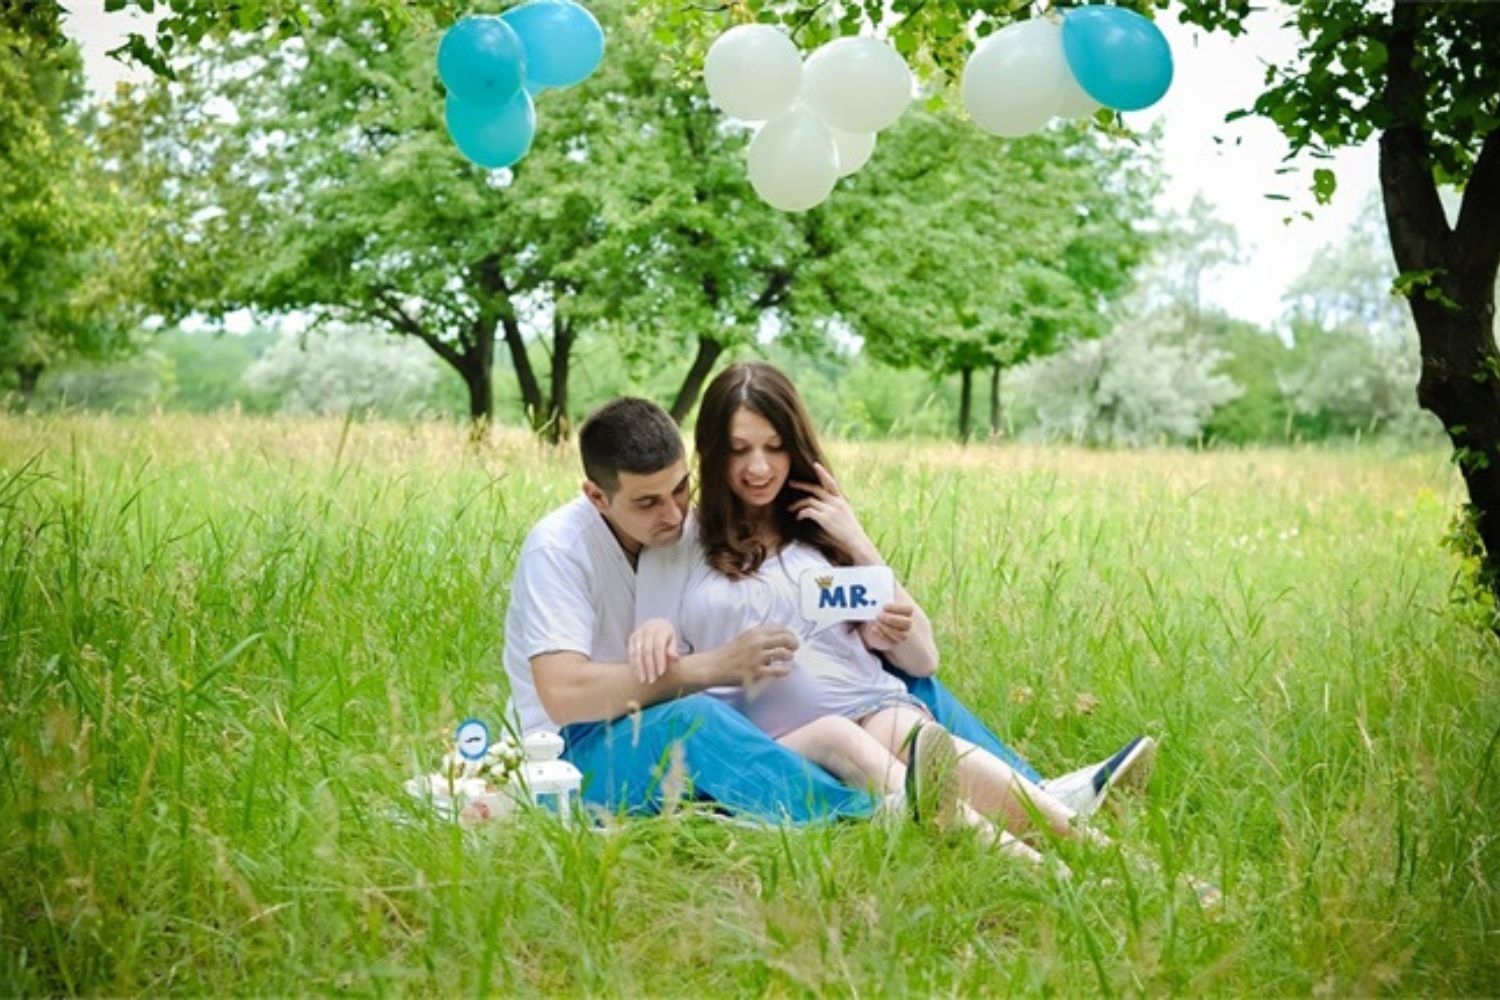 couple maternity photo with balloons